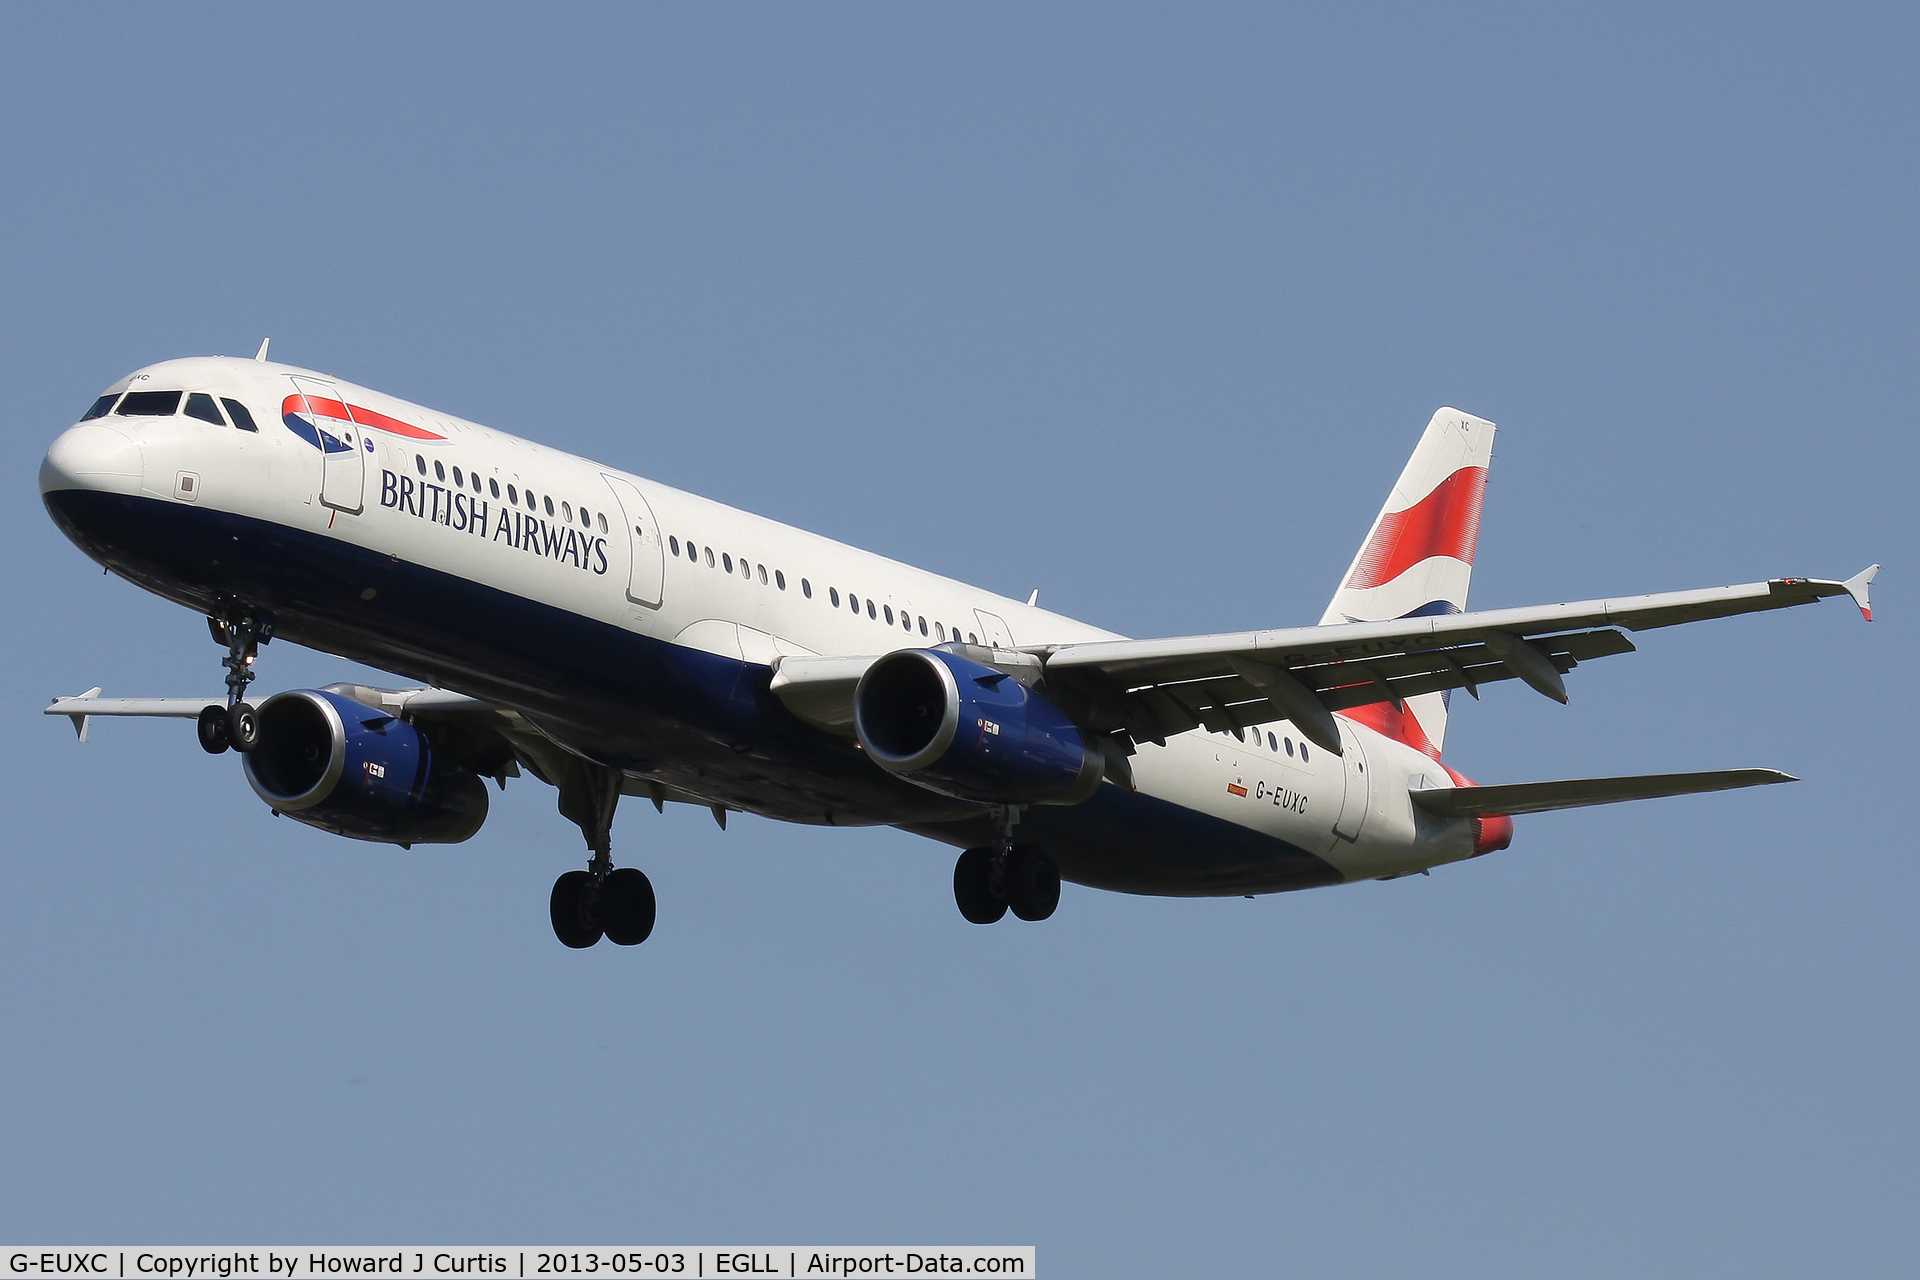 G-EUXC, 2004 Airbus A321-231 C/N 2305, British Airways, on approach to runway 27L.